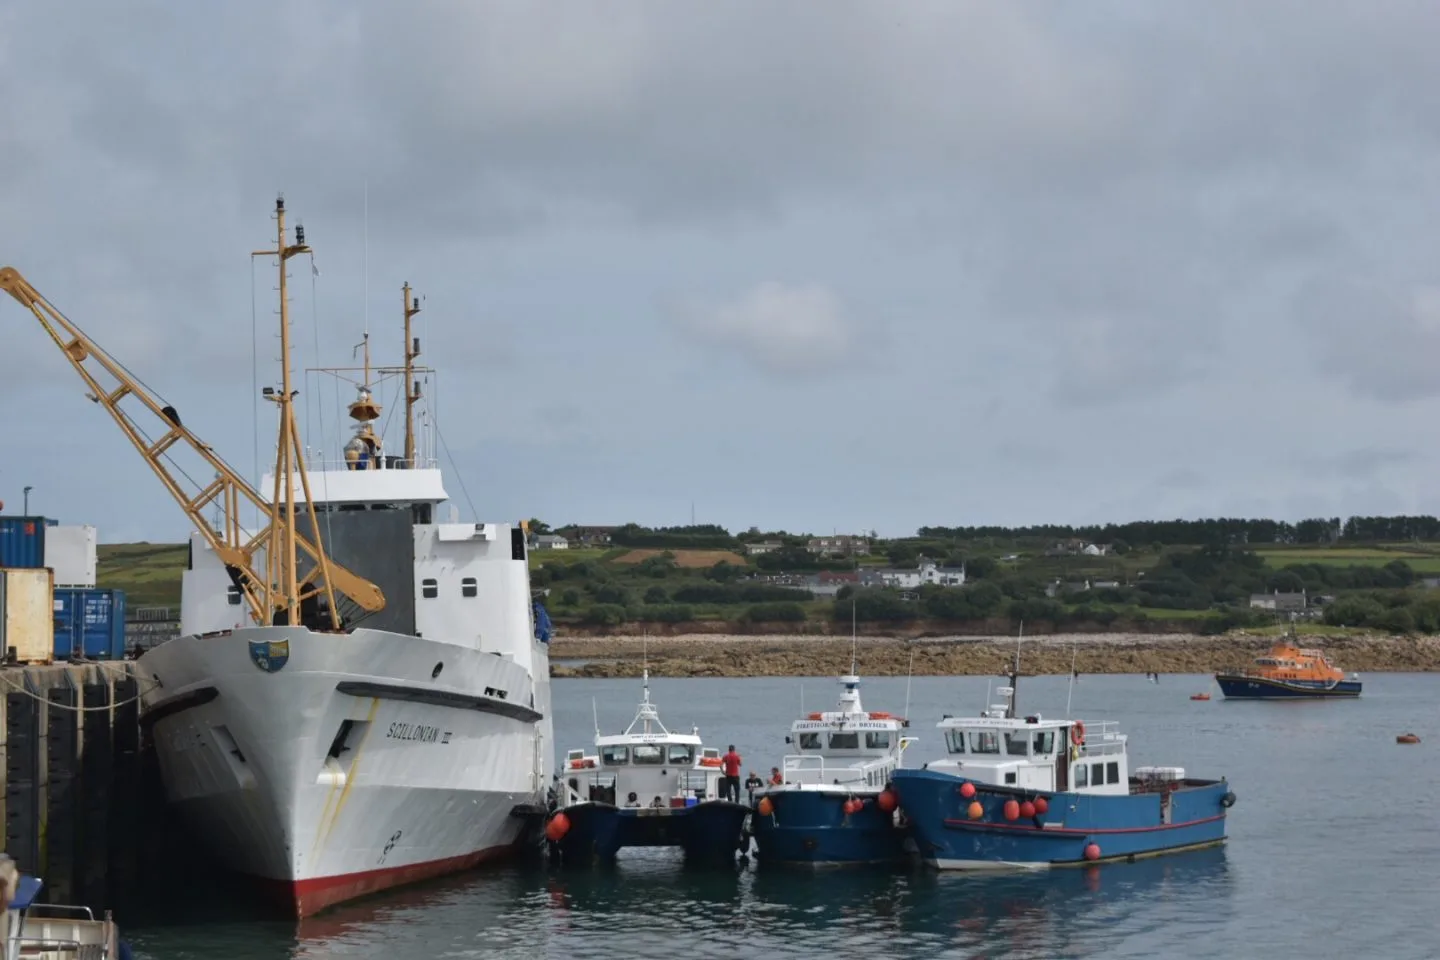 travelling to the Isles of Scilly